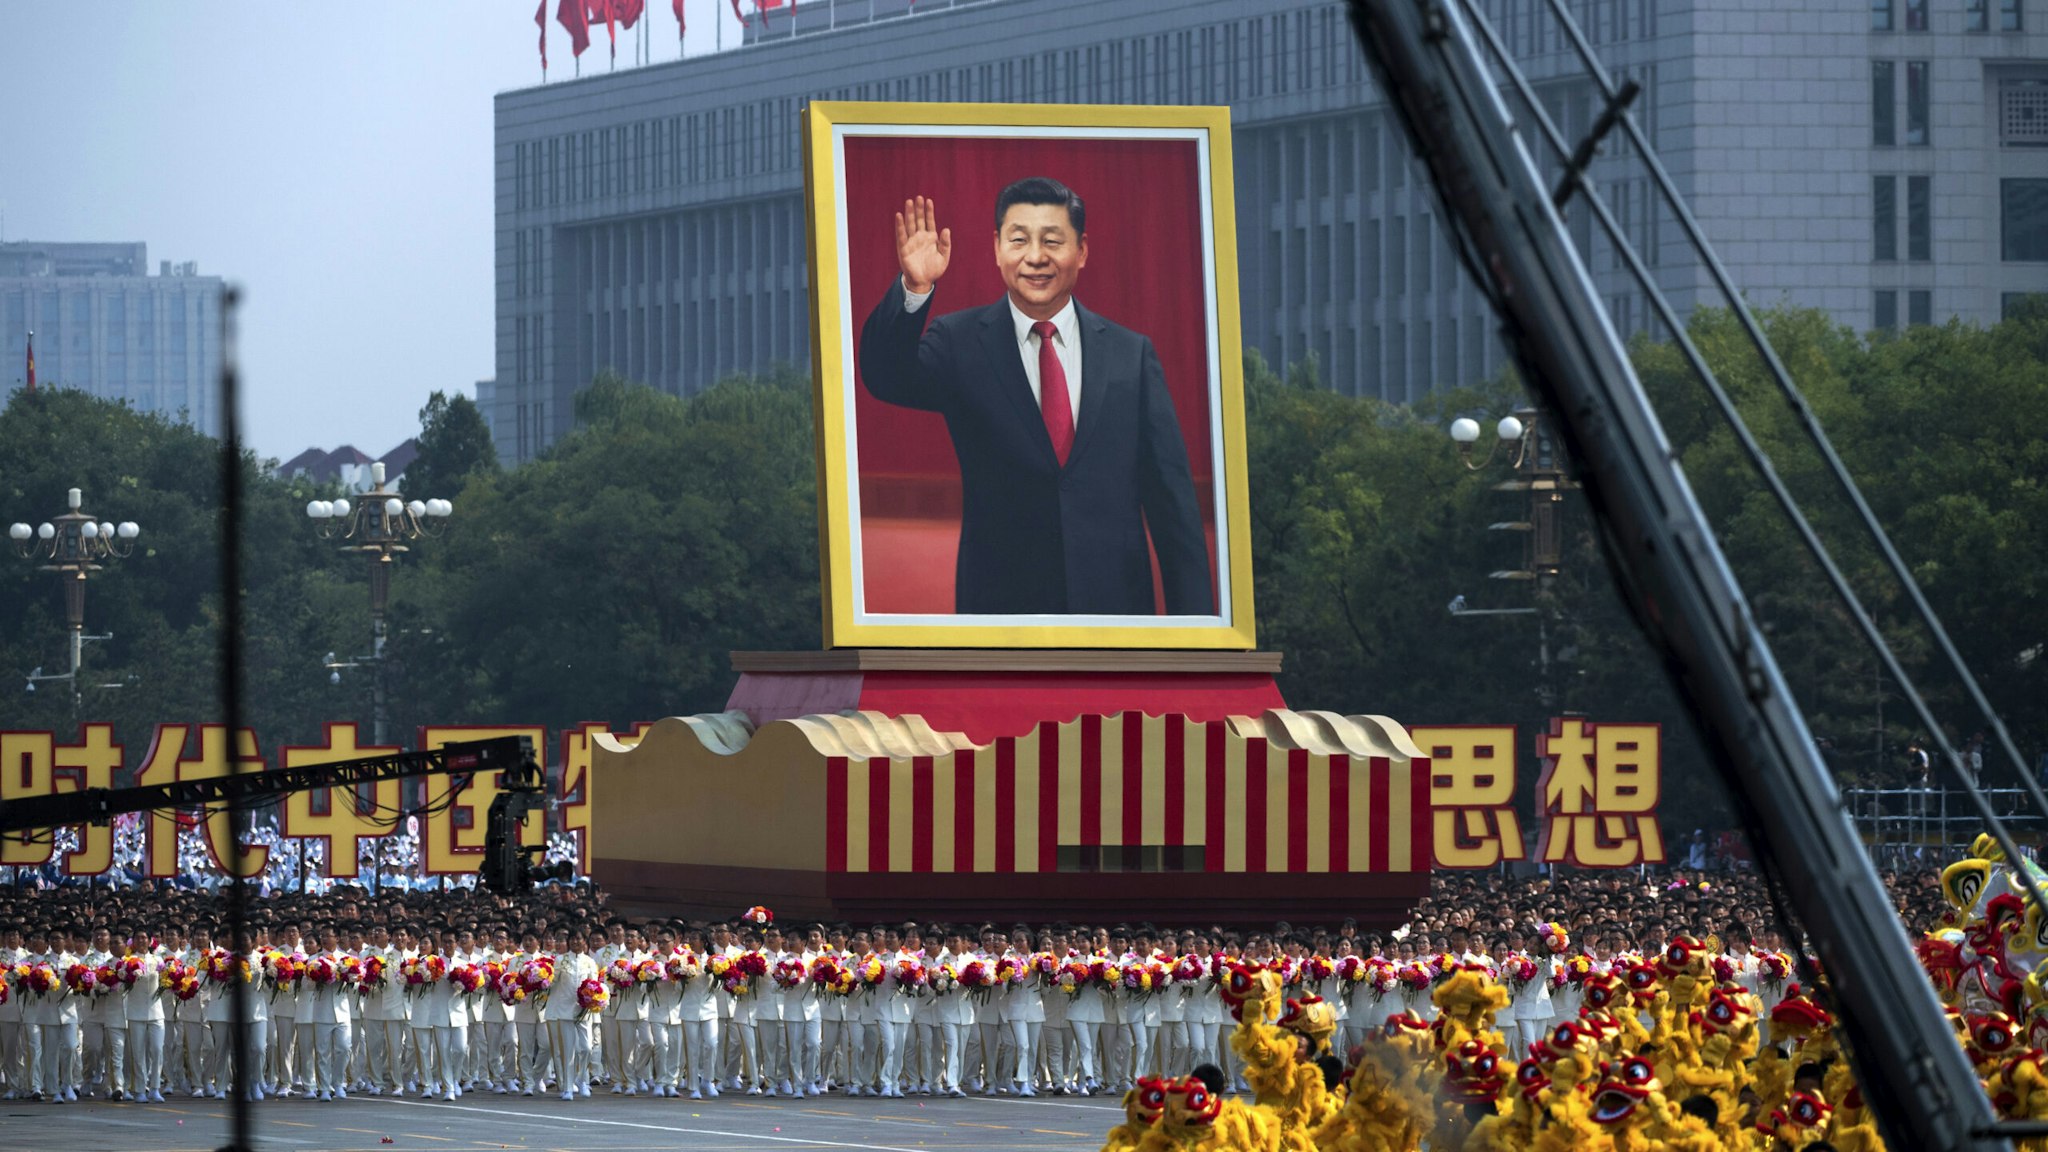 A giant portrait of Chinese President Xi Jinping is carried atop a float at a parade to celebrate the 70th Anniversary of the founding of the People's Republic of China in 1949 , at Tiananmen Square on October 1, 2019 in Beijing, China.